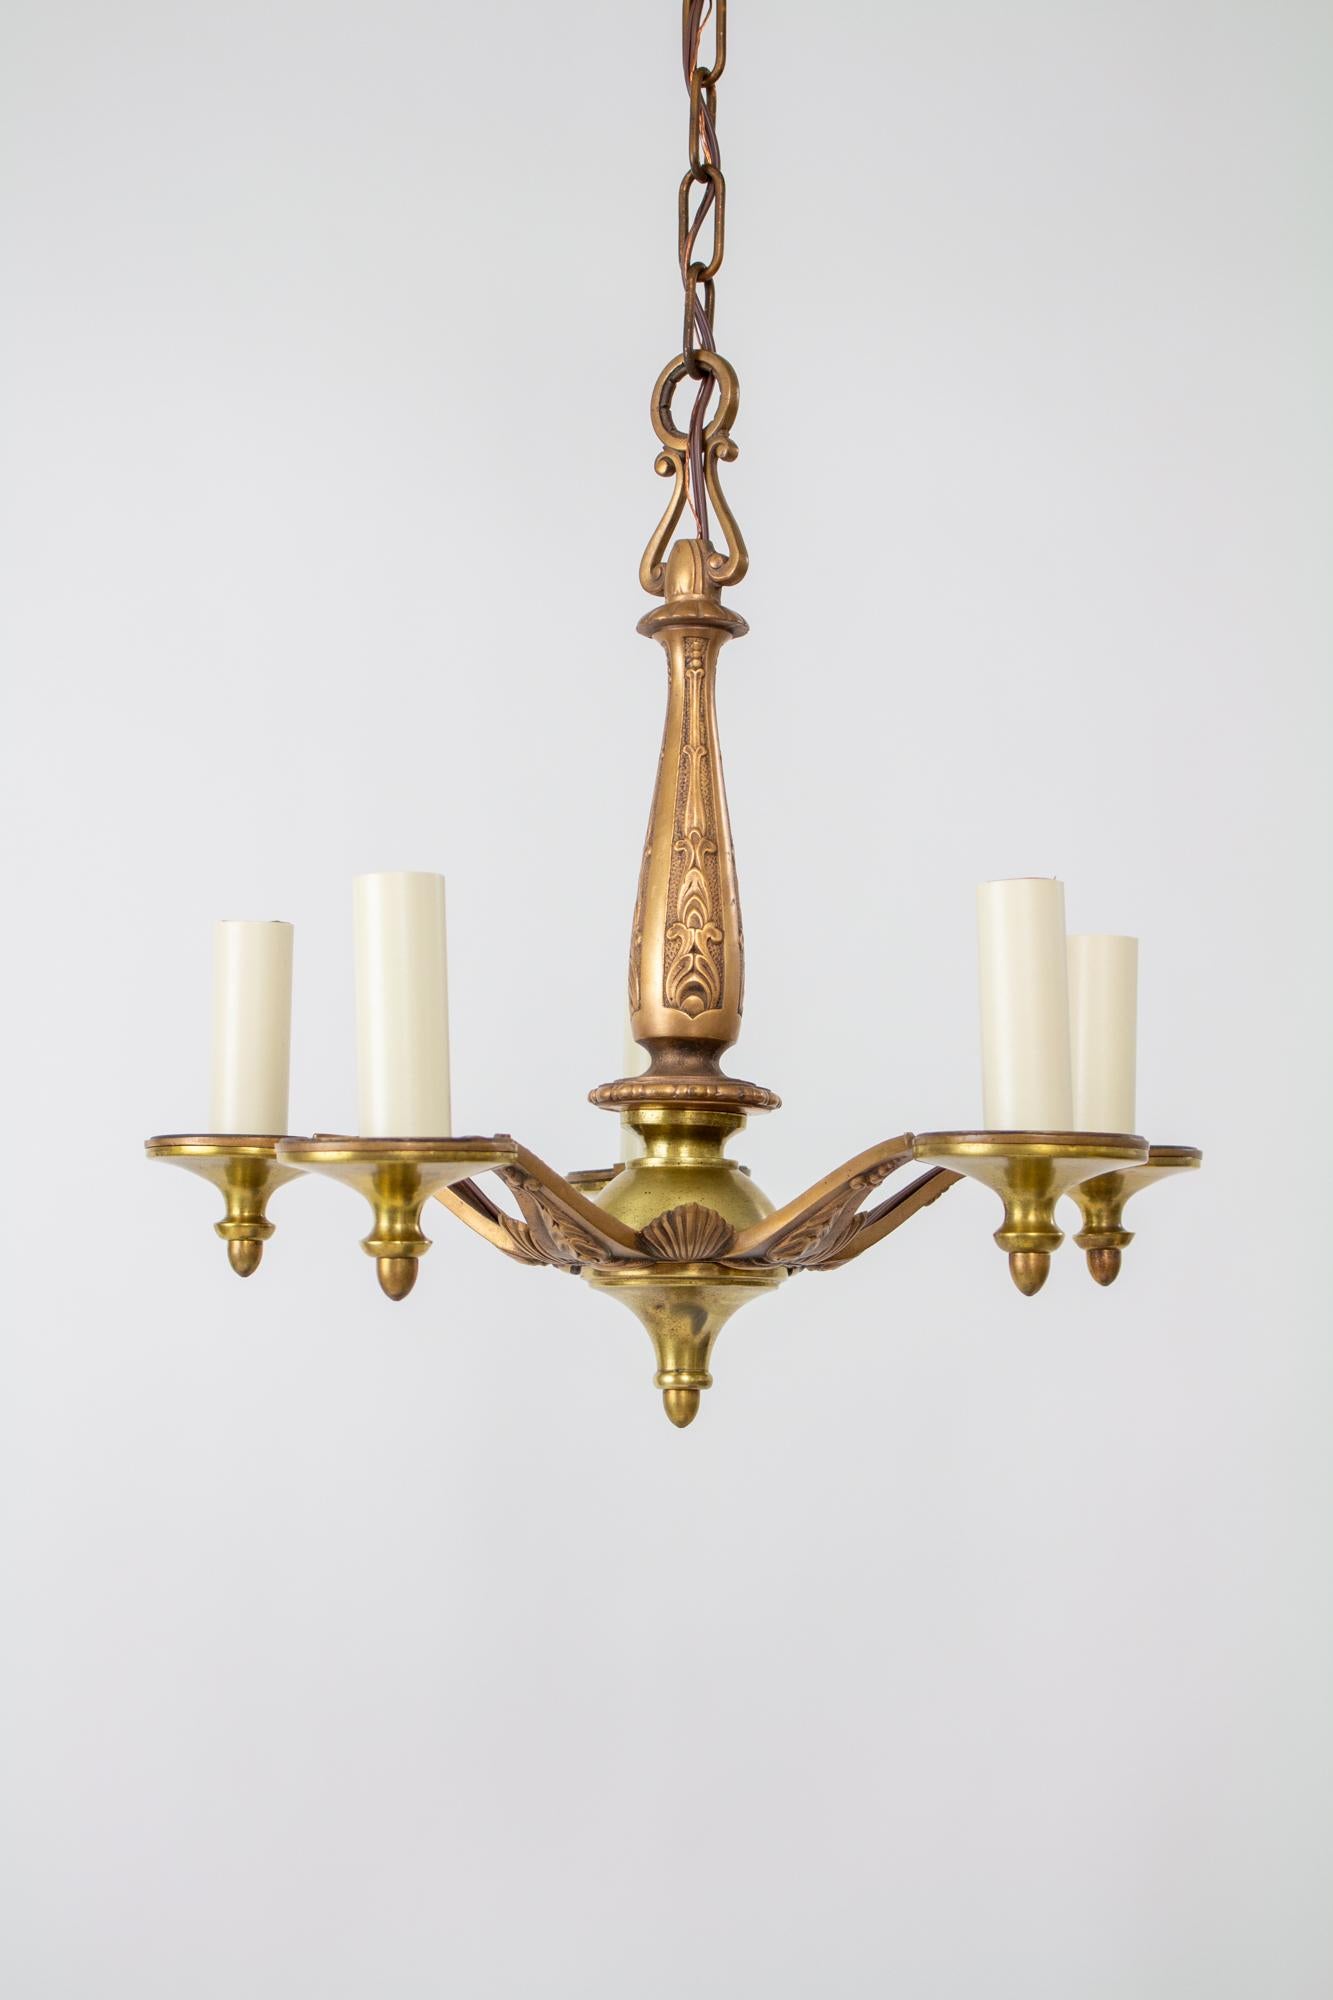 Five arm art deco cast bronze chandelier. cast bronze stem and arms with some brass stem elements. The casting is a geometric botanical design. Five arms and five lights. C. 1930. American. 

In very good condition, metals have been cleaned, fixture